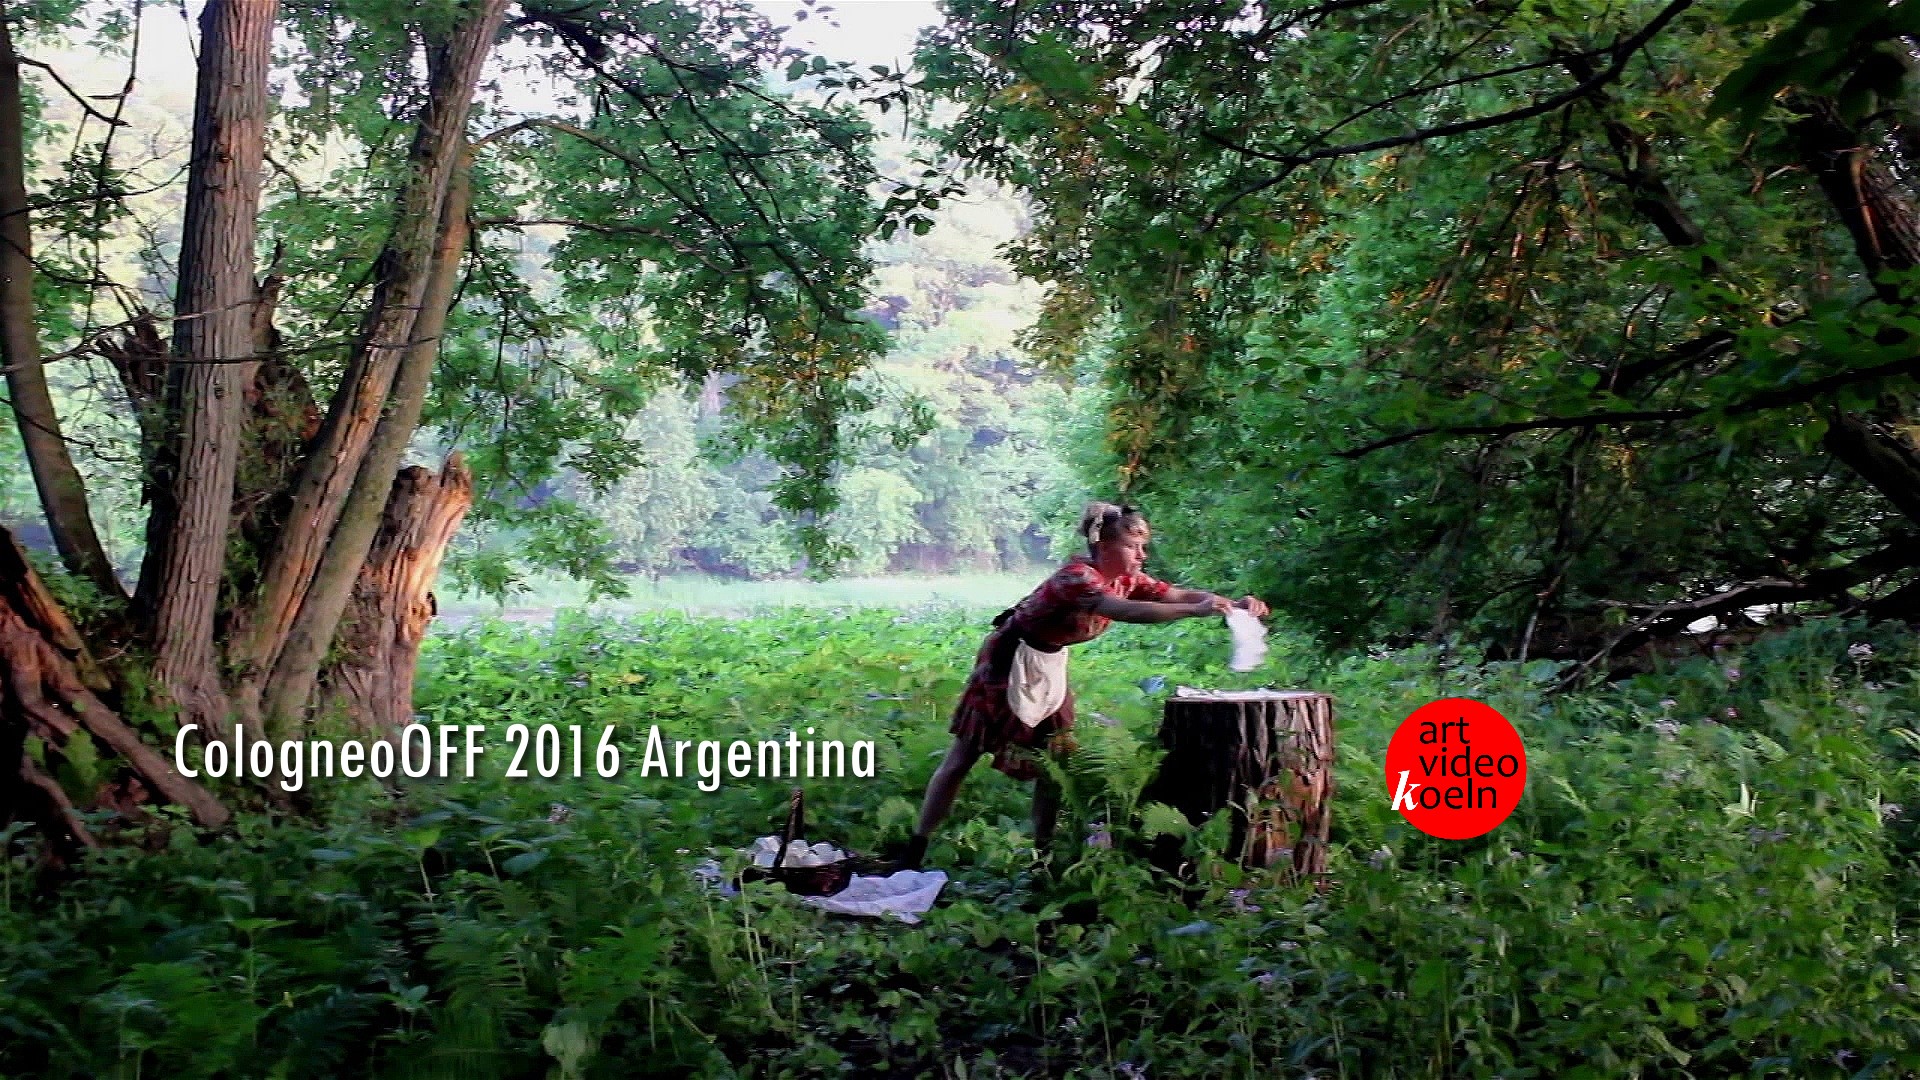 CologneOFF 2016 Argentina – 2-4 December